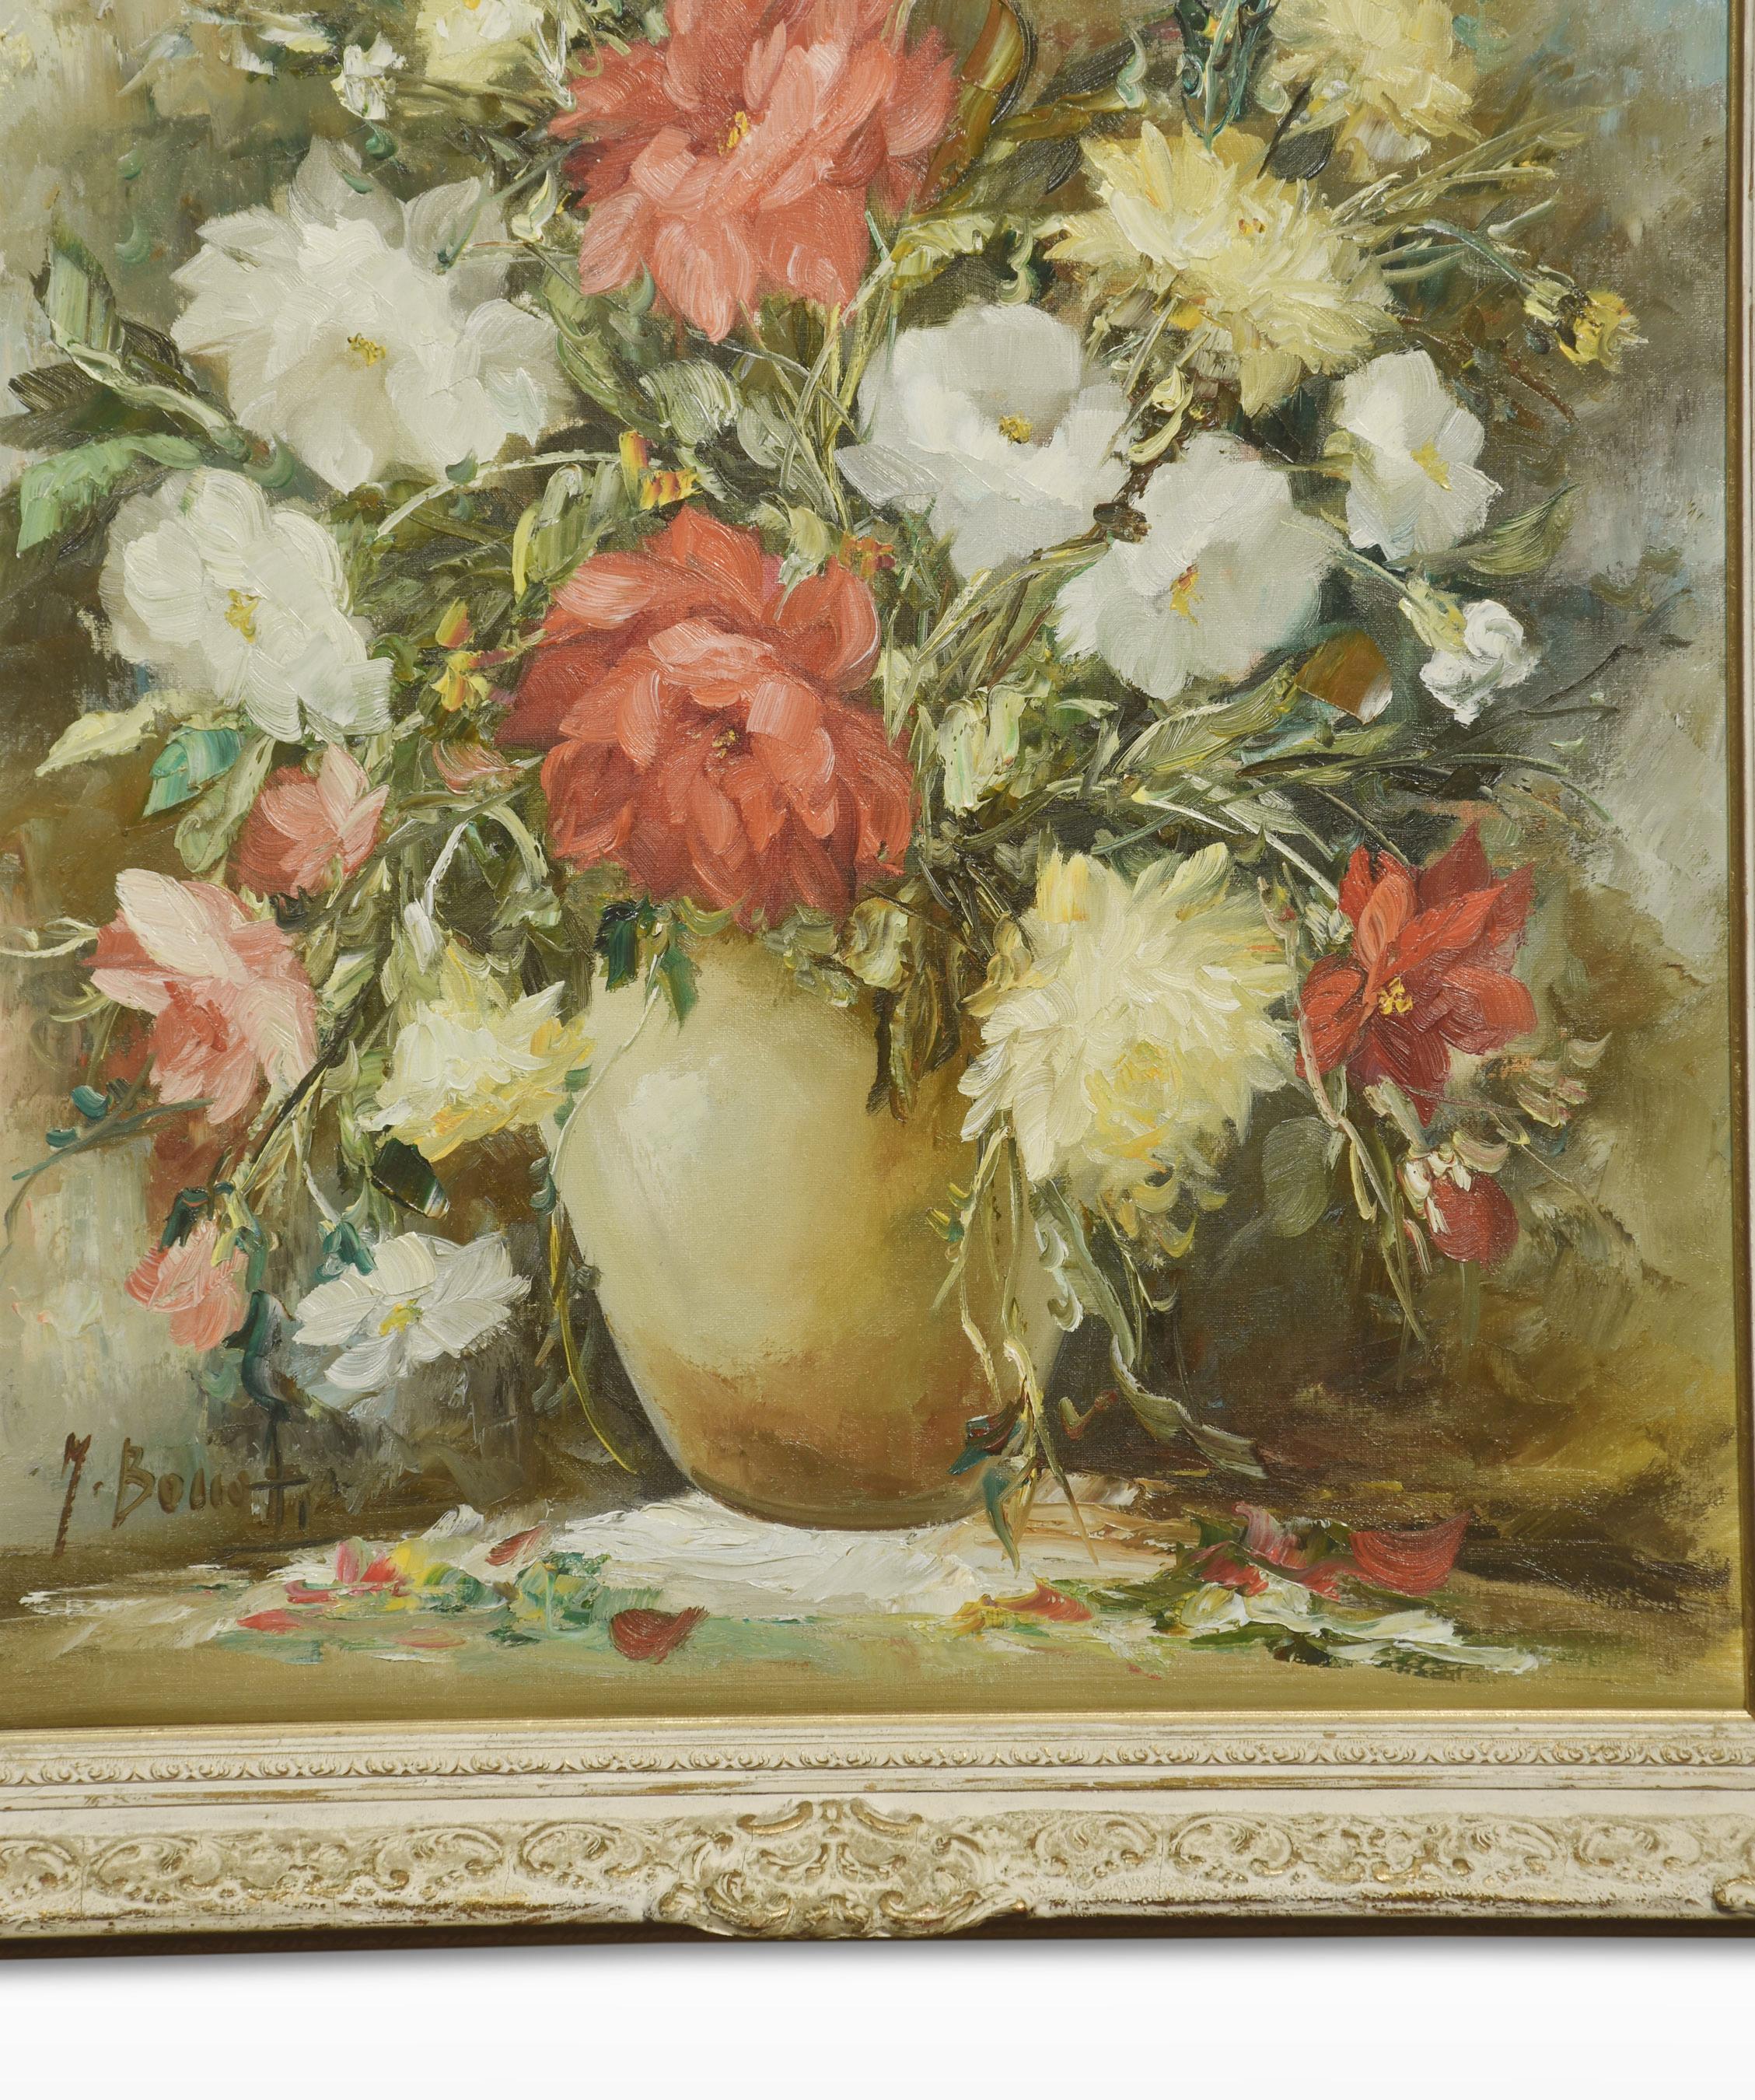 Still life with flowers in a vase, oil on canvas, signed Manuela Bonati encased in carved frame.
Dimensions
Height 28 Inches
Width 24 Inches
Depth 2 Inches.